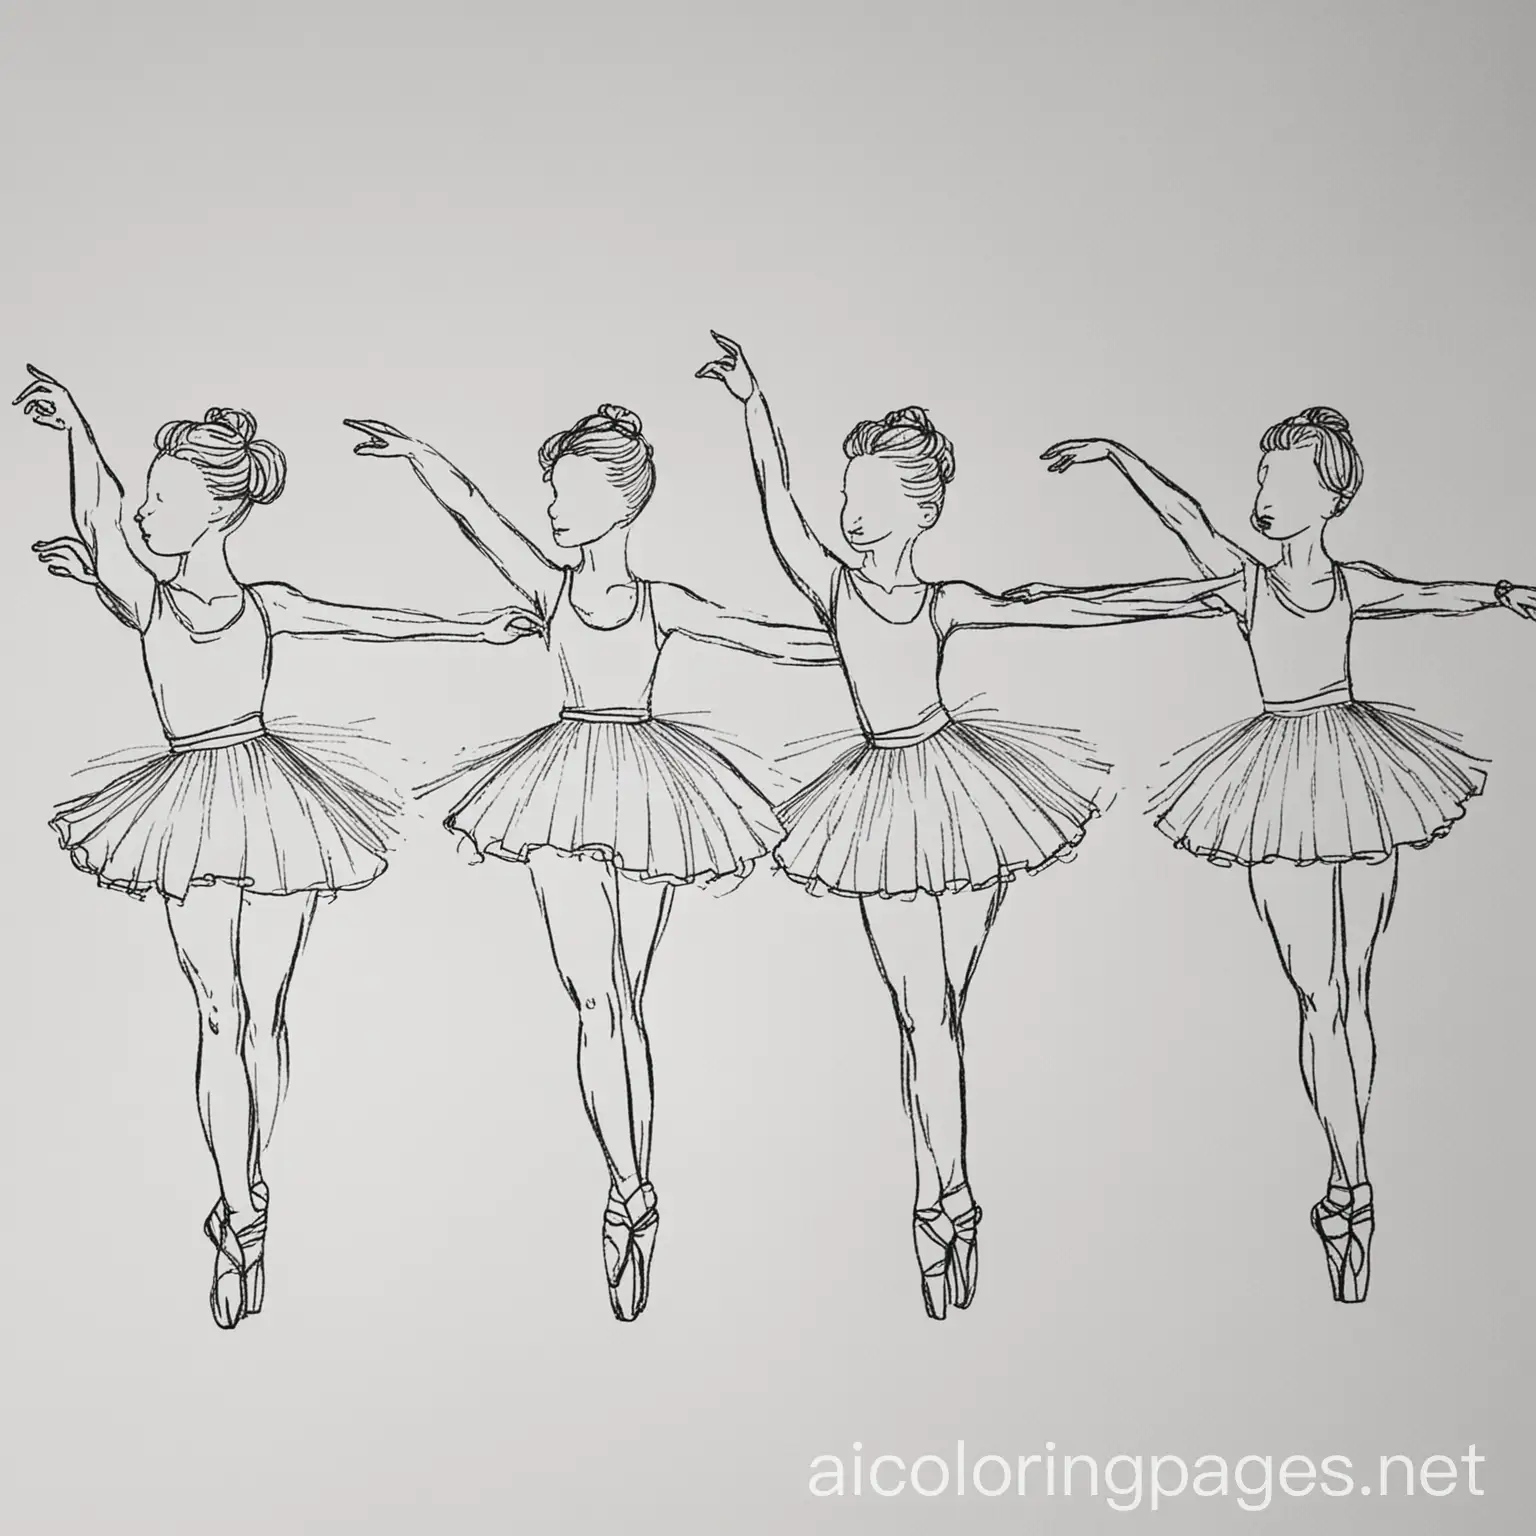 Ballet dancers, Coloring Page, black and white, line art, white background, Simplicity, Ample White Space. The background of the coloring page is plain white to make it easy for young children to color within the lines. The outlines of all the subjects are easy to distinguish, making it simple for kids to color without too much difficulty